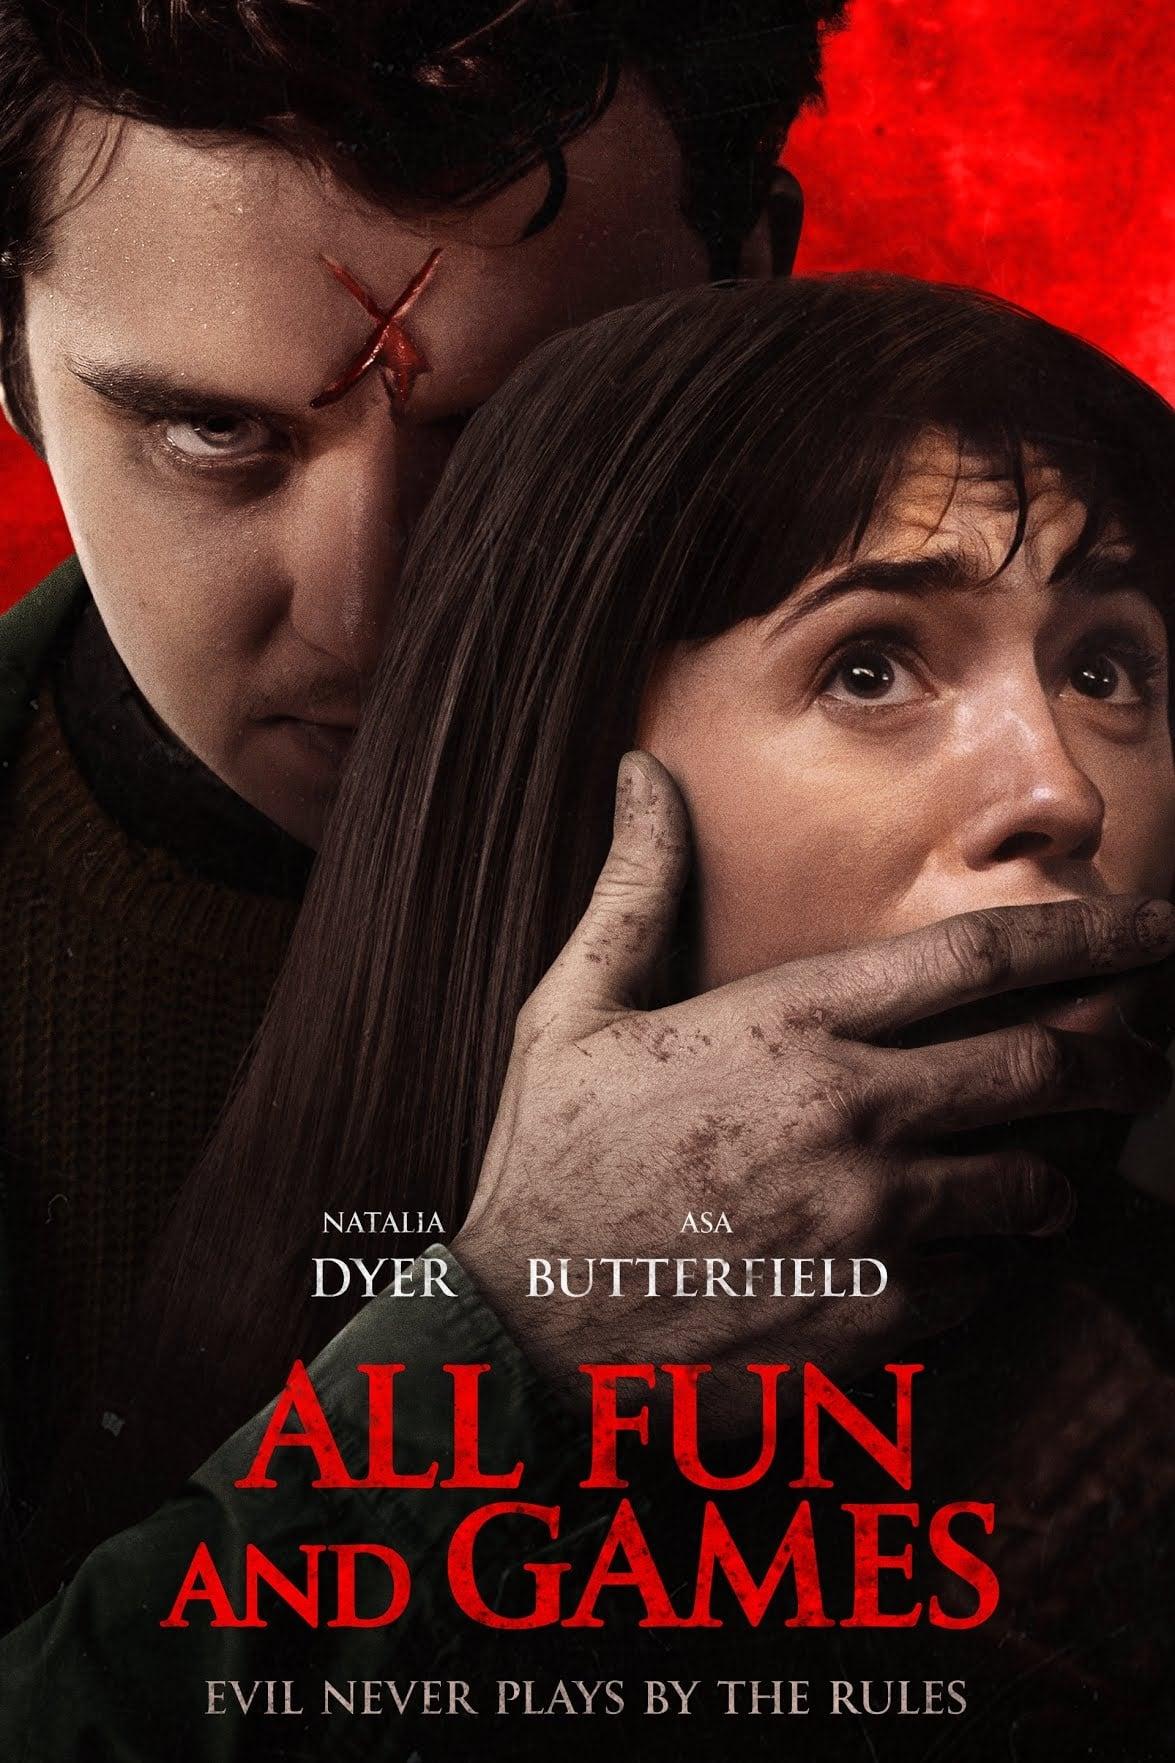 All Fun and Games poster